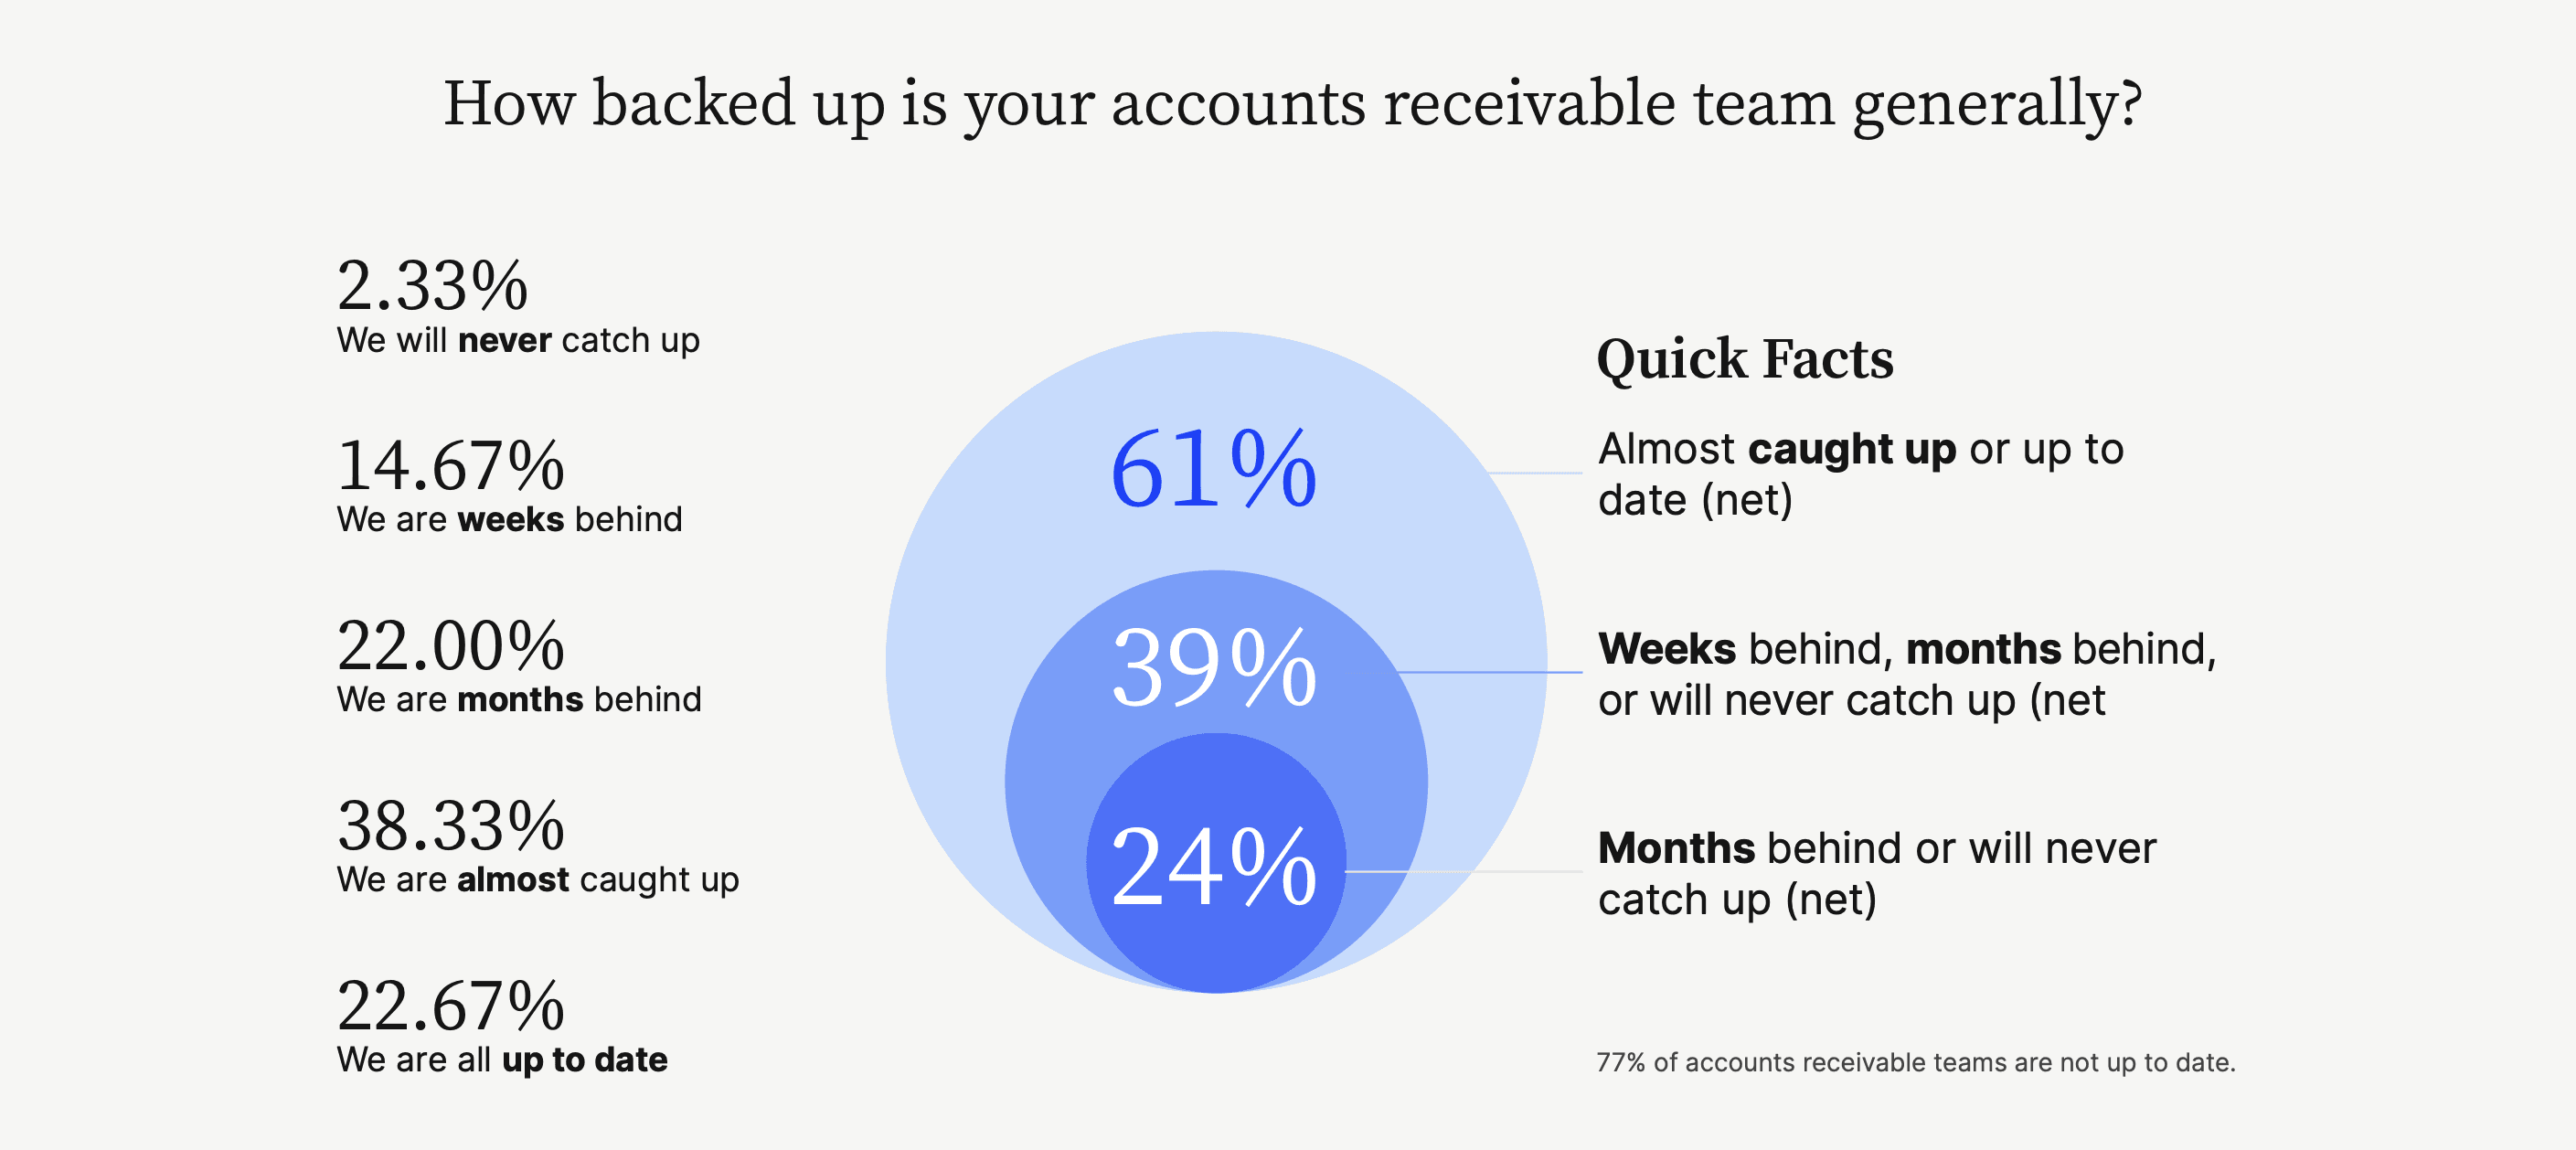 How backed up accounts receivable teams generally are